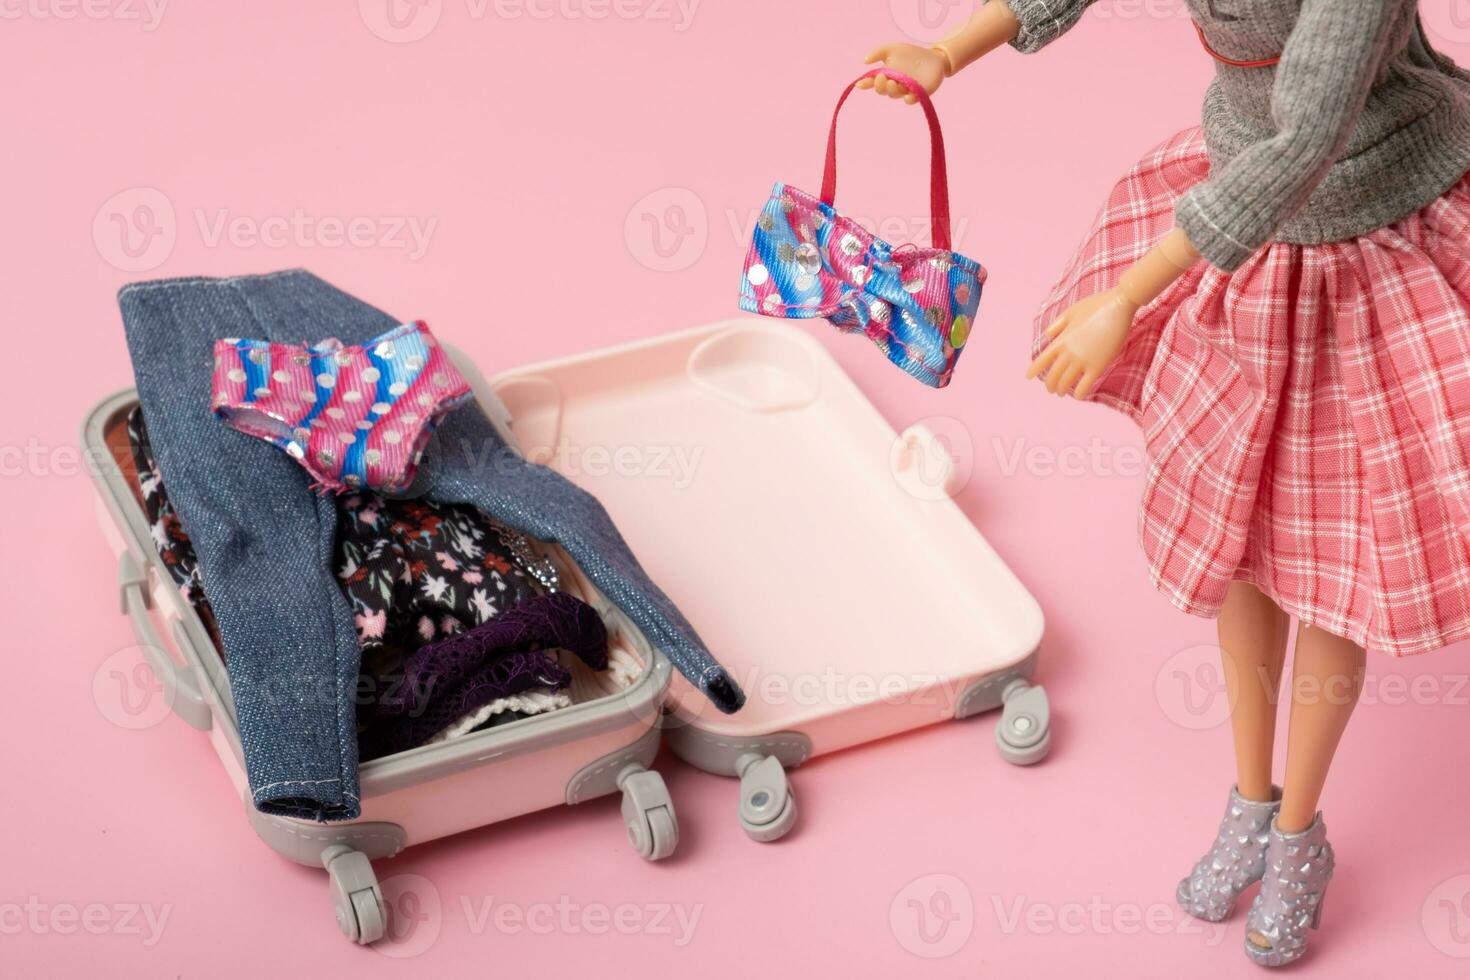 The doll puts swimsuit in a baggage. Preparing for traveling. Travel concept photo